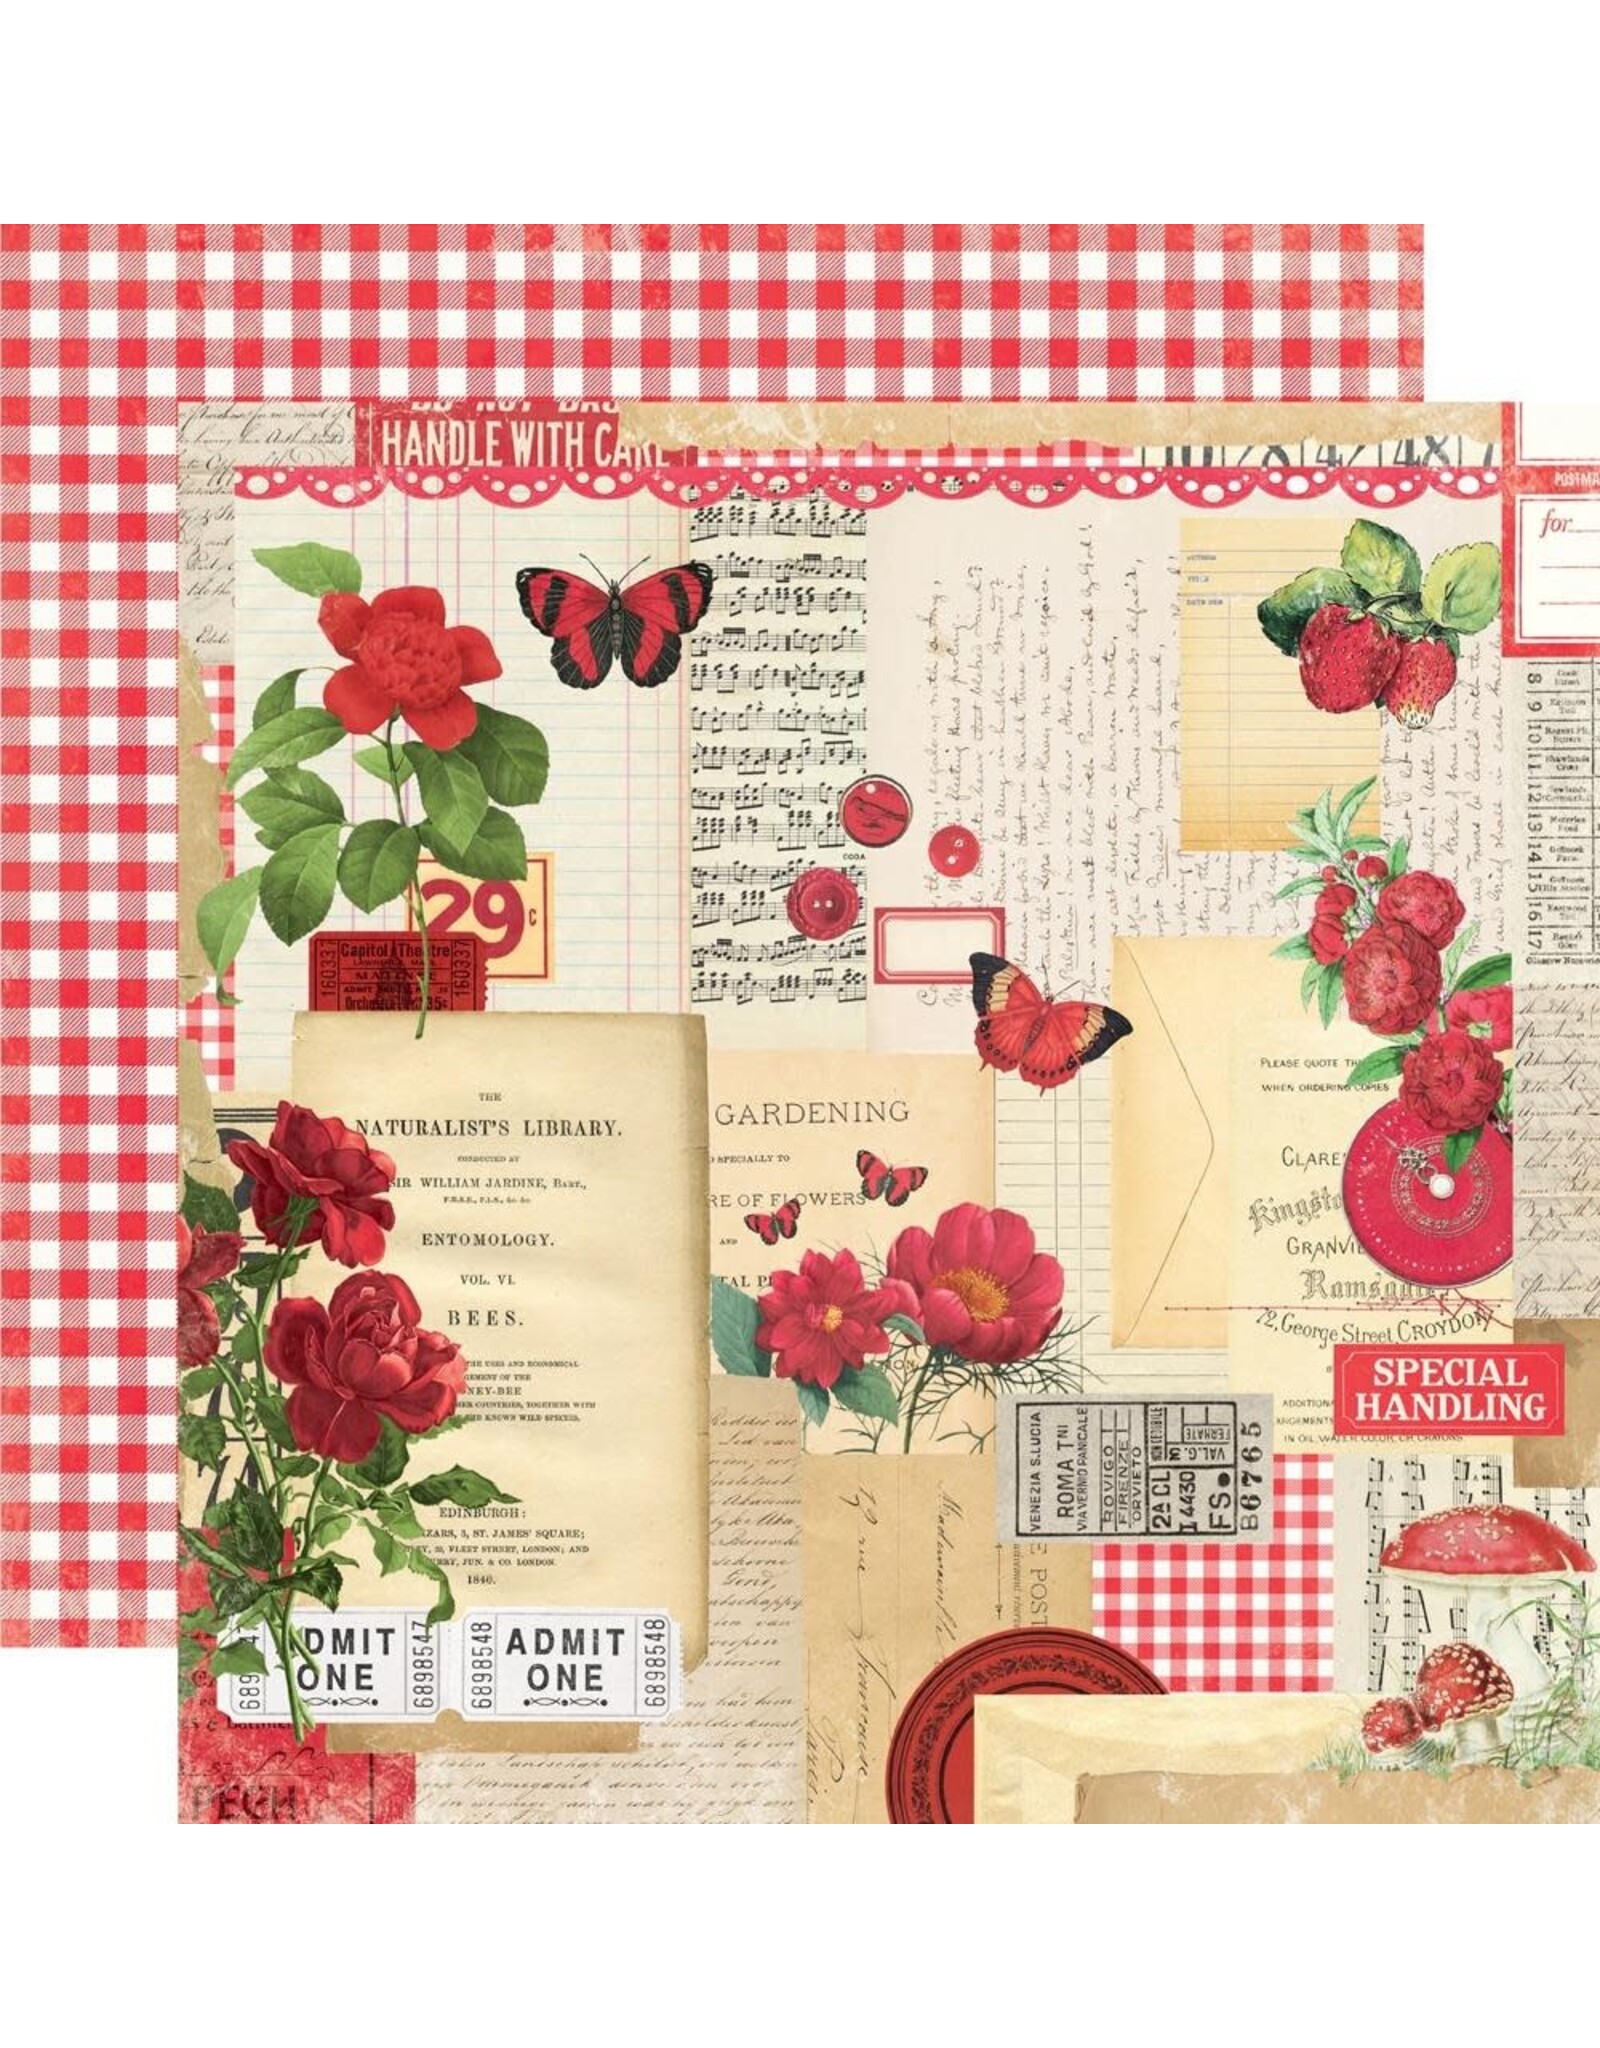 SIMPLE STORIES SIMPLE STORIES SIMPLE VINTAGE ESSENTIALS COLOR PALETTE RED COLLAGE 12x12 CARDSTOCK